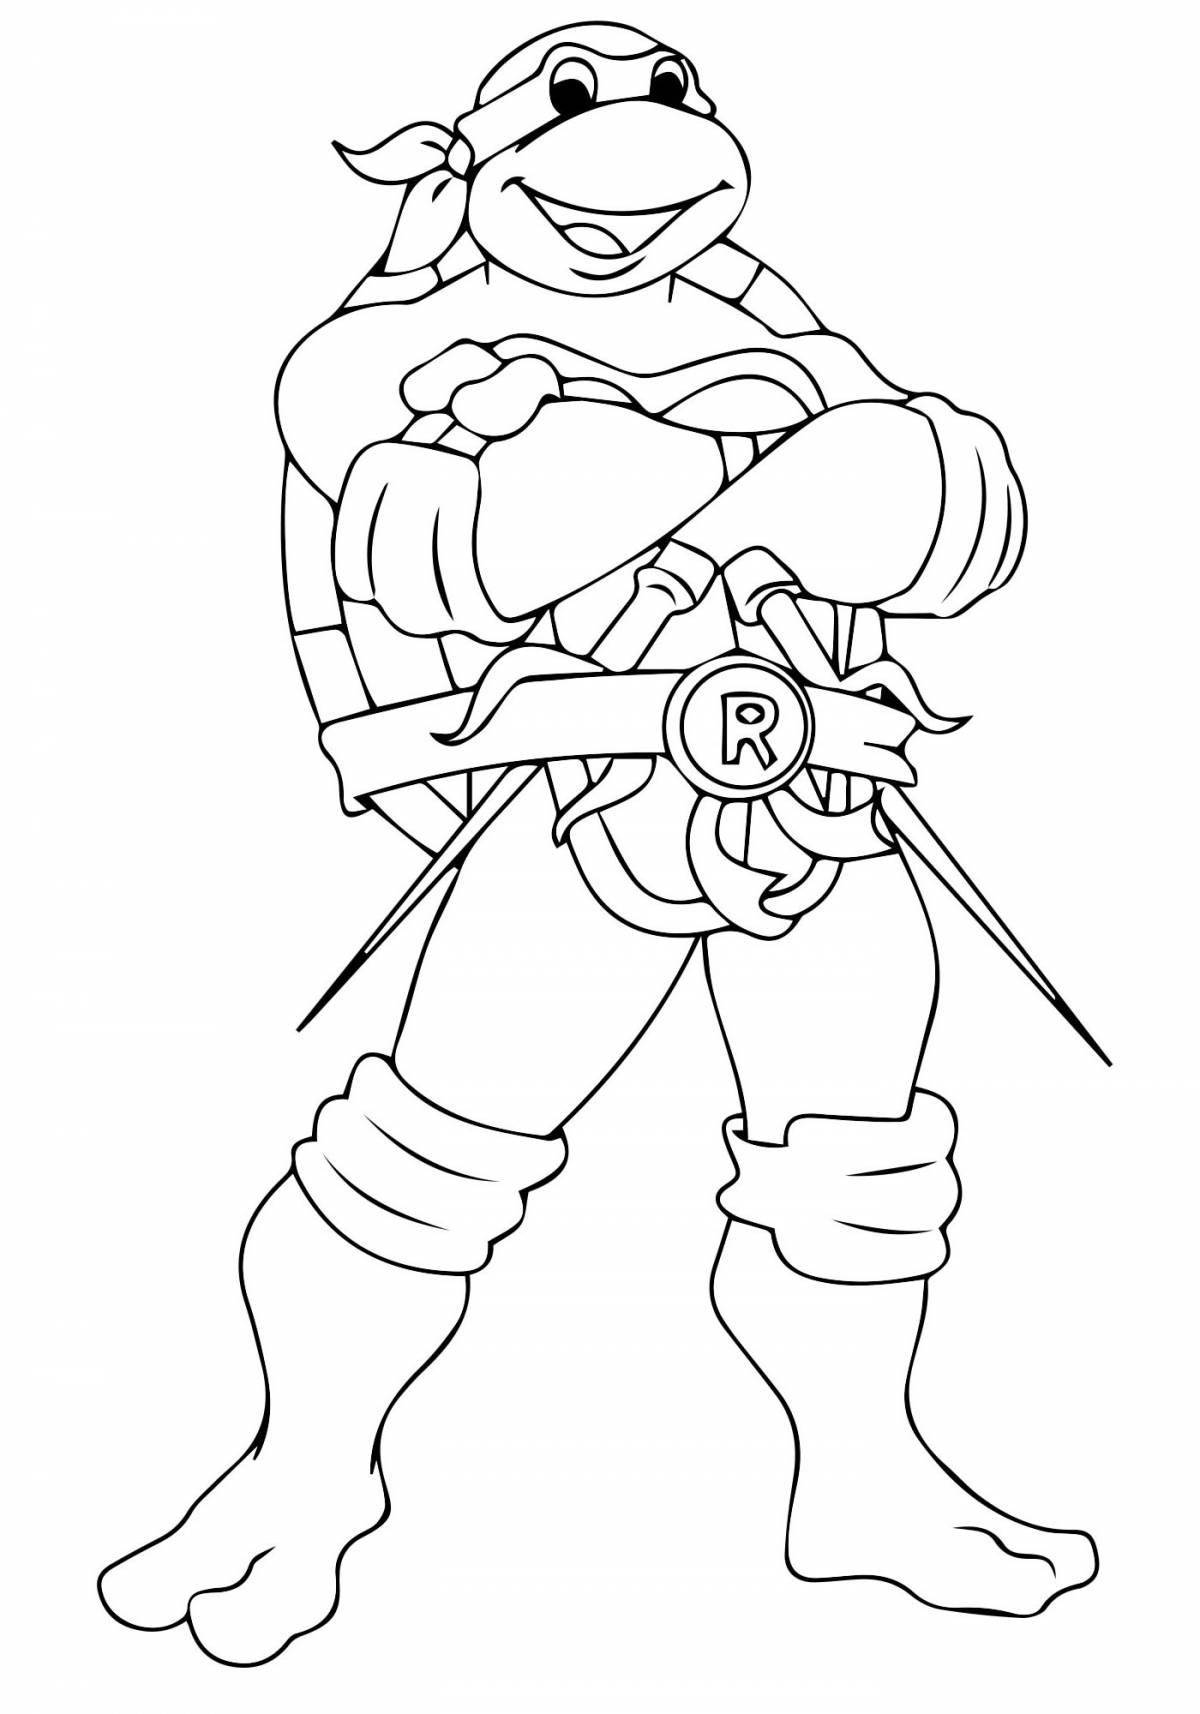 Colorful raphael turtle coloring page